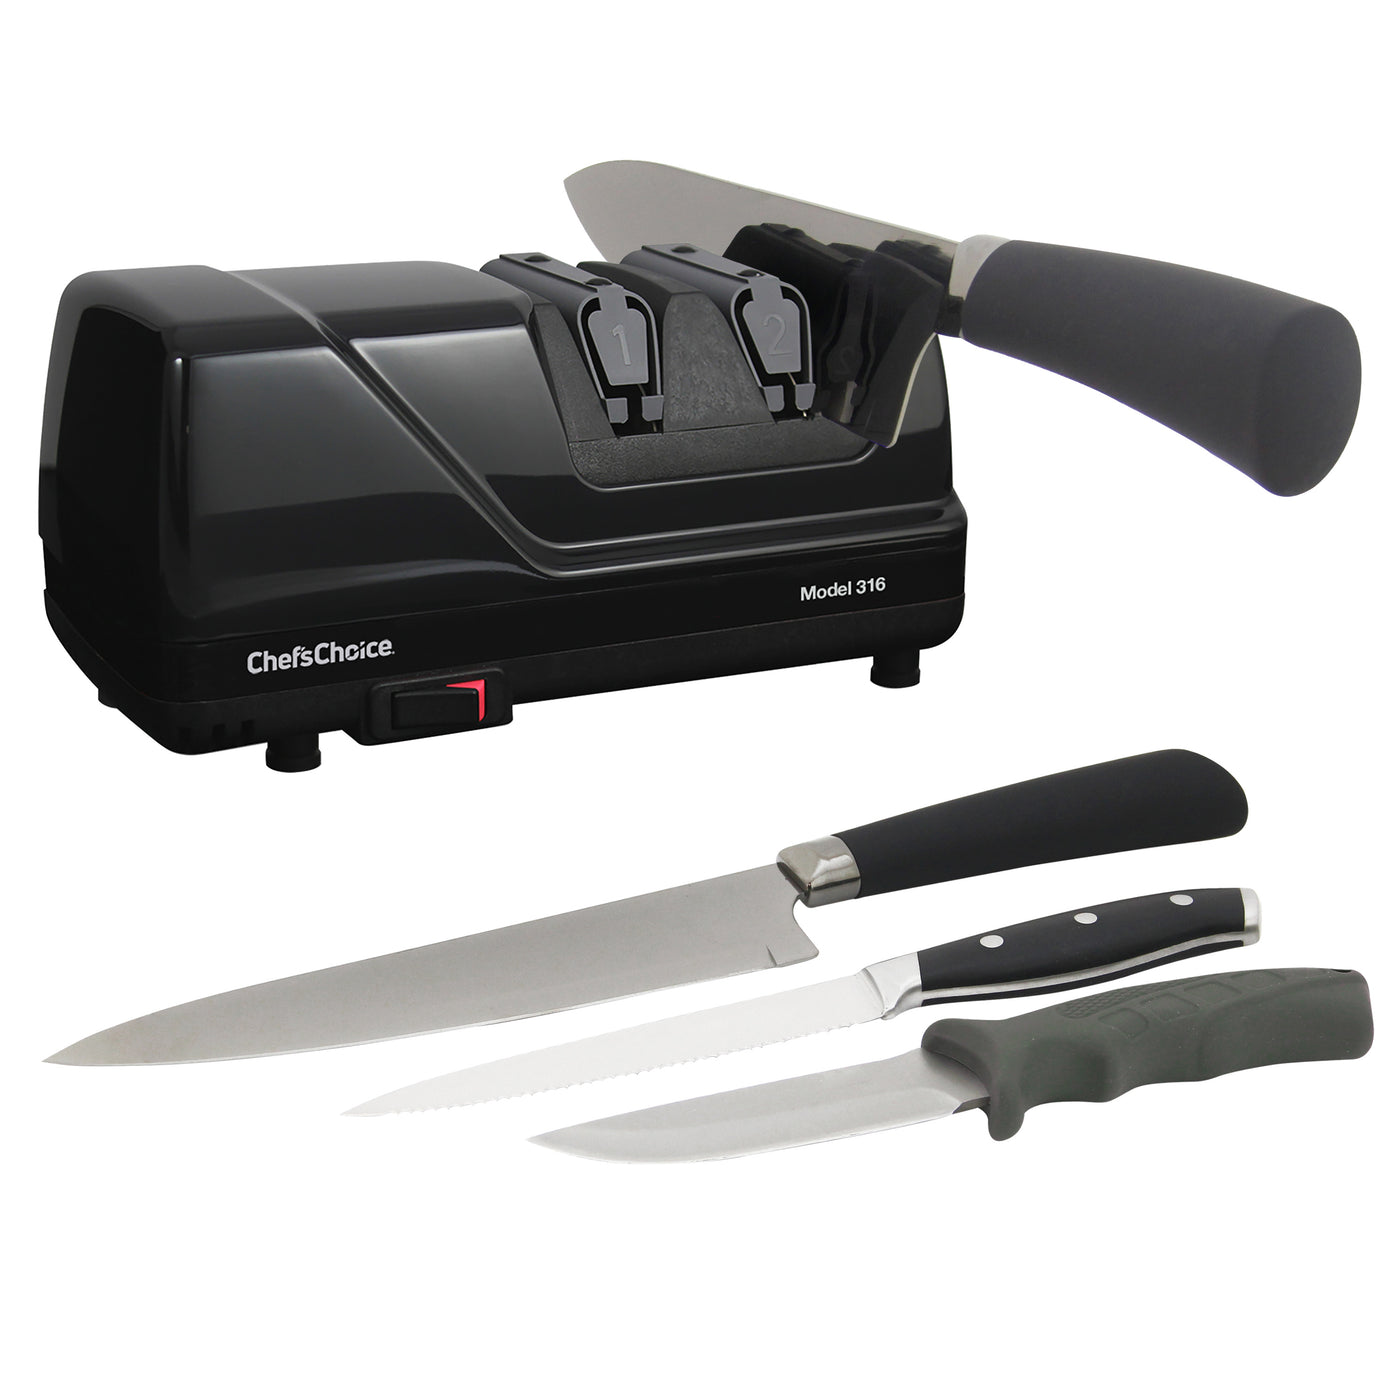 Types of Knife Sharpeners - Manual, Electric & More